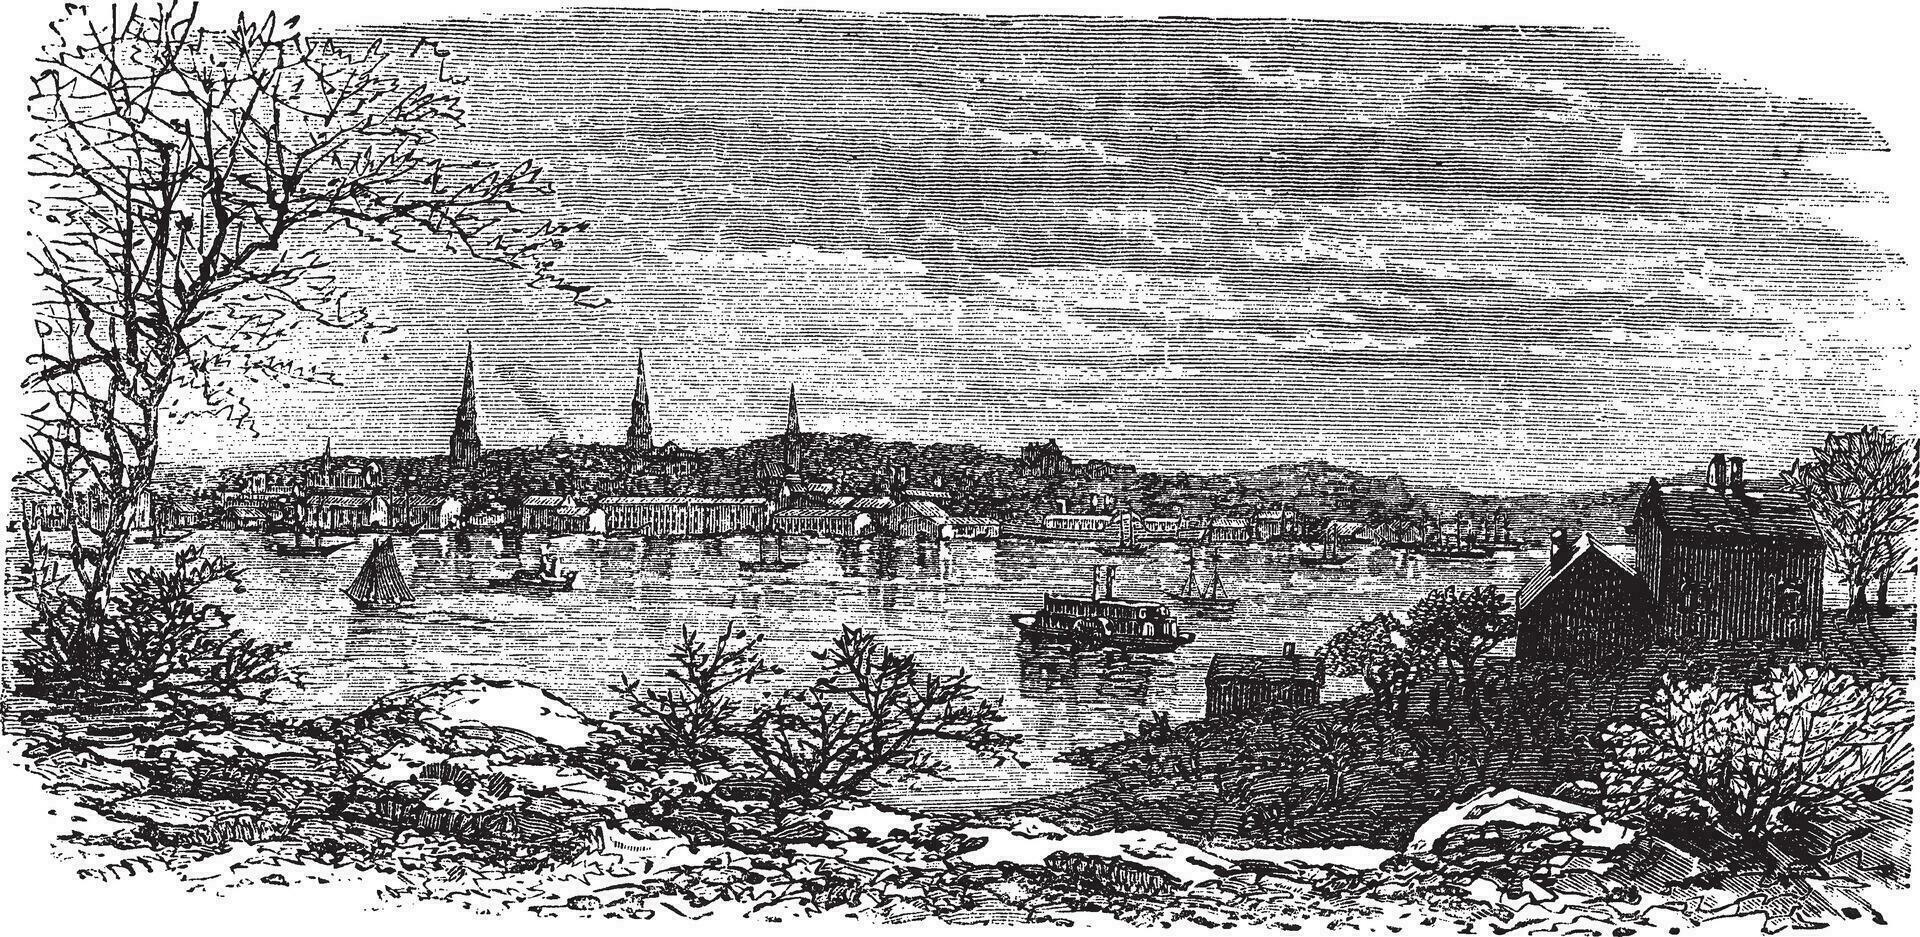 New London in Connecticut, USA, vintage engraved illustration vector